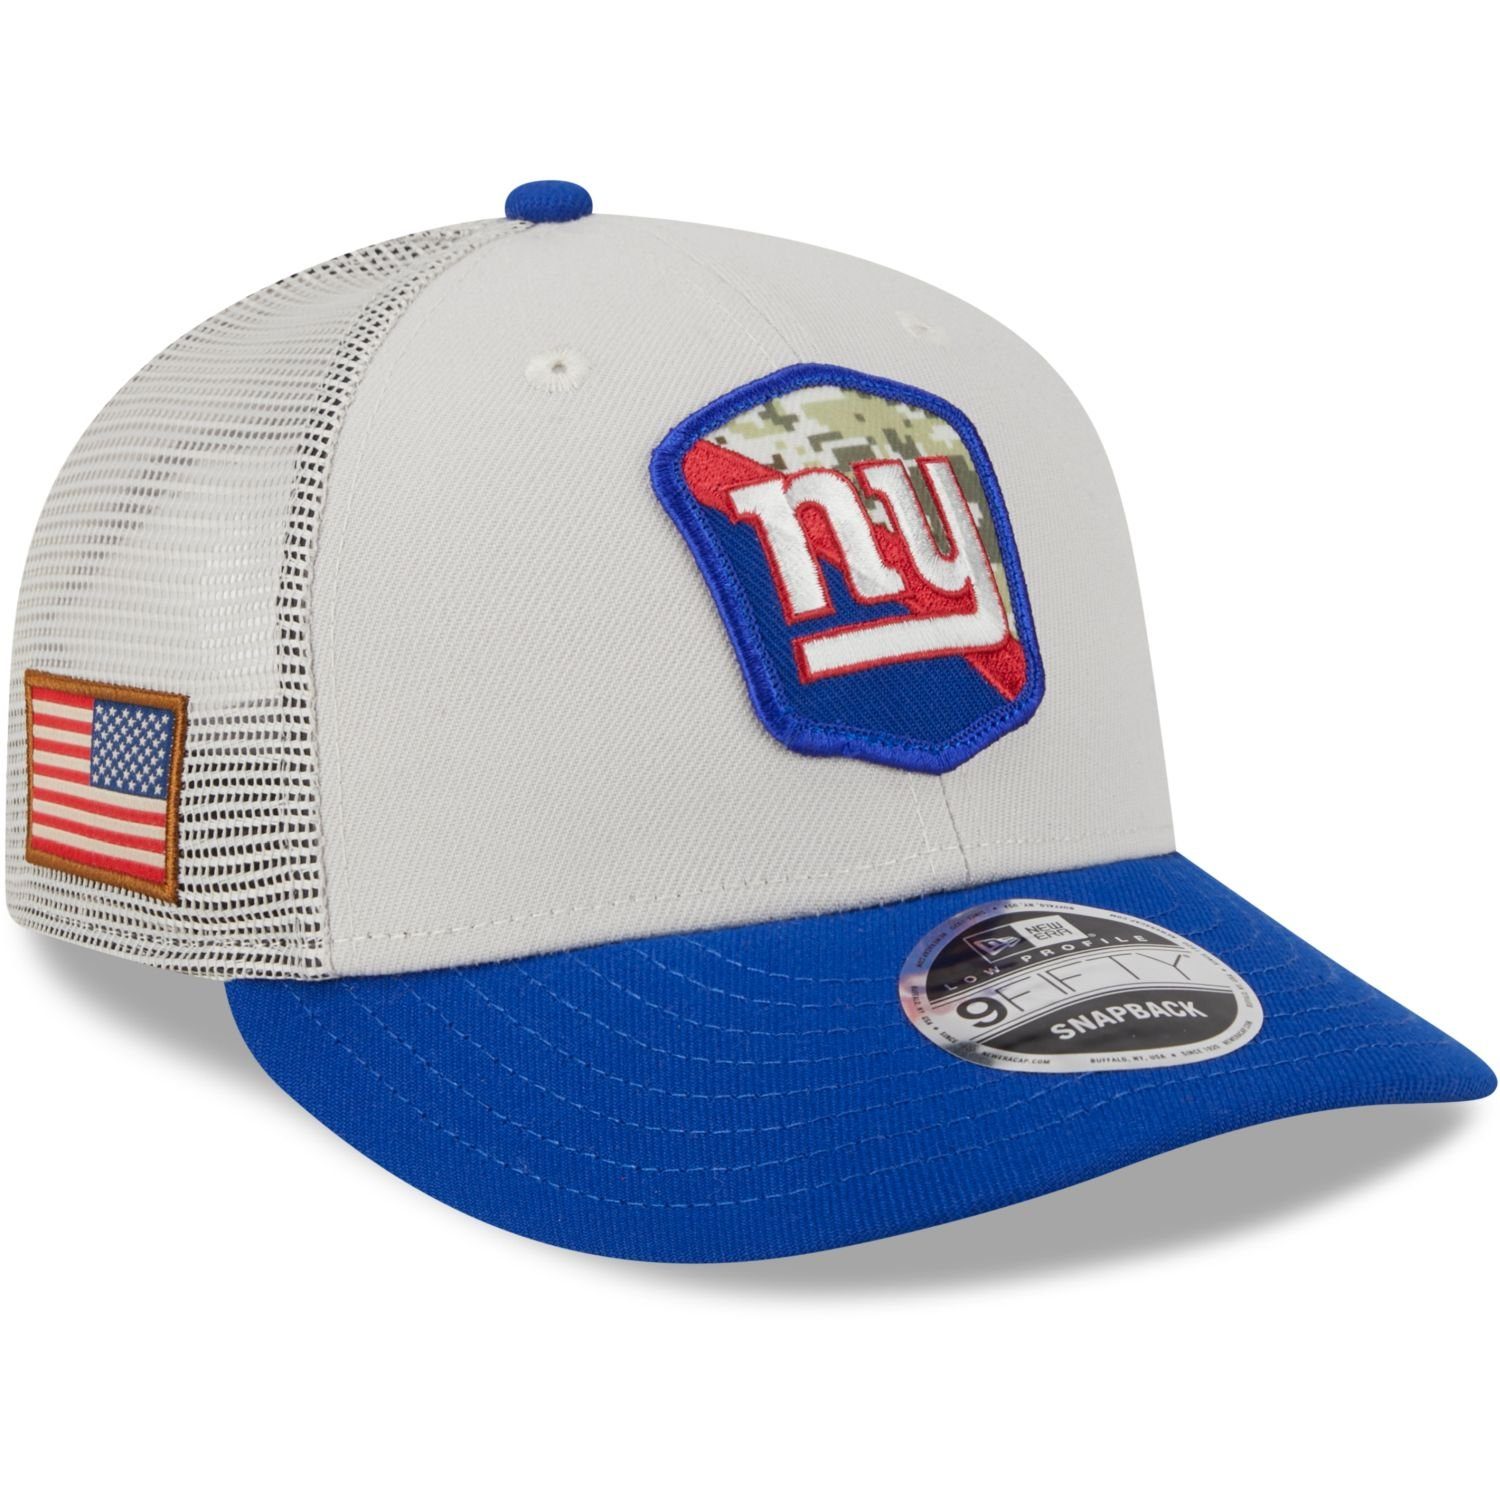 New Era Snapback Cap 9Fifty Low Profile Snap NFL Salute to Service New York Giants